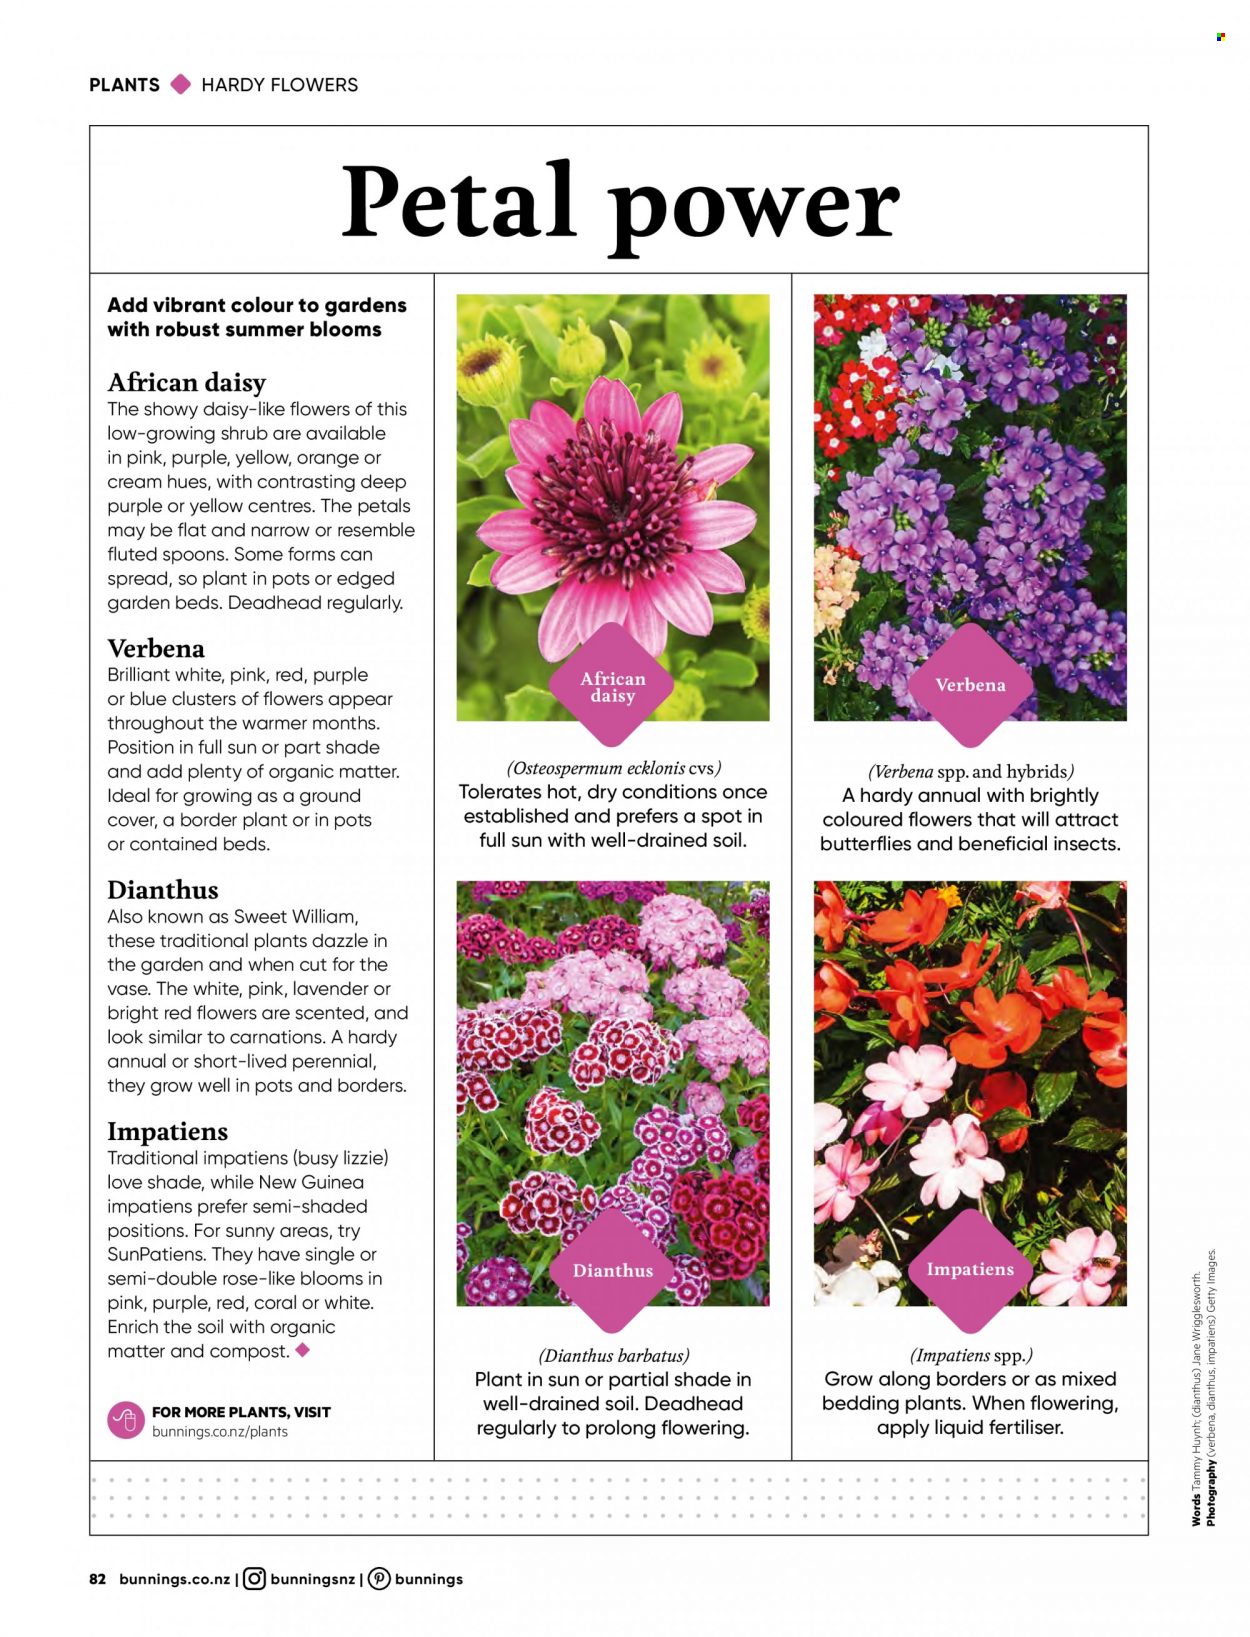 thumbnail - Bunnings Warehouse Catalogue - Sales products - vase, spoon, pot, bedding, rose, compost. Page 82.